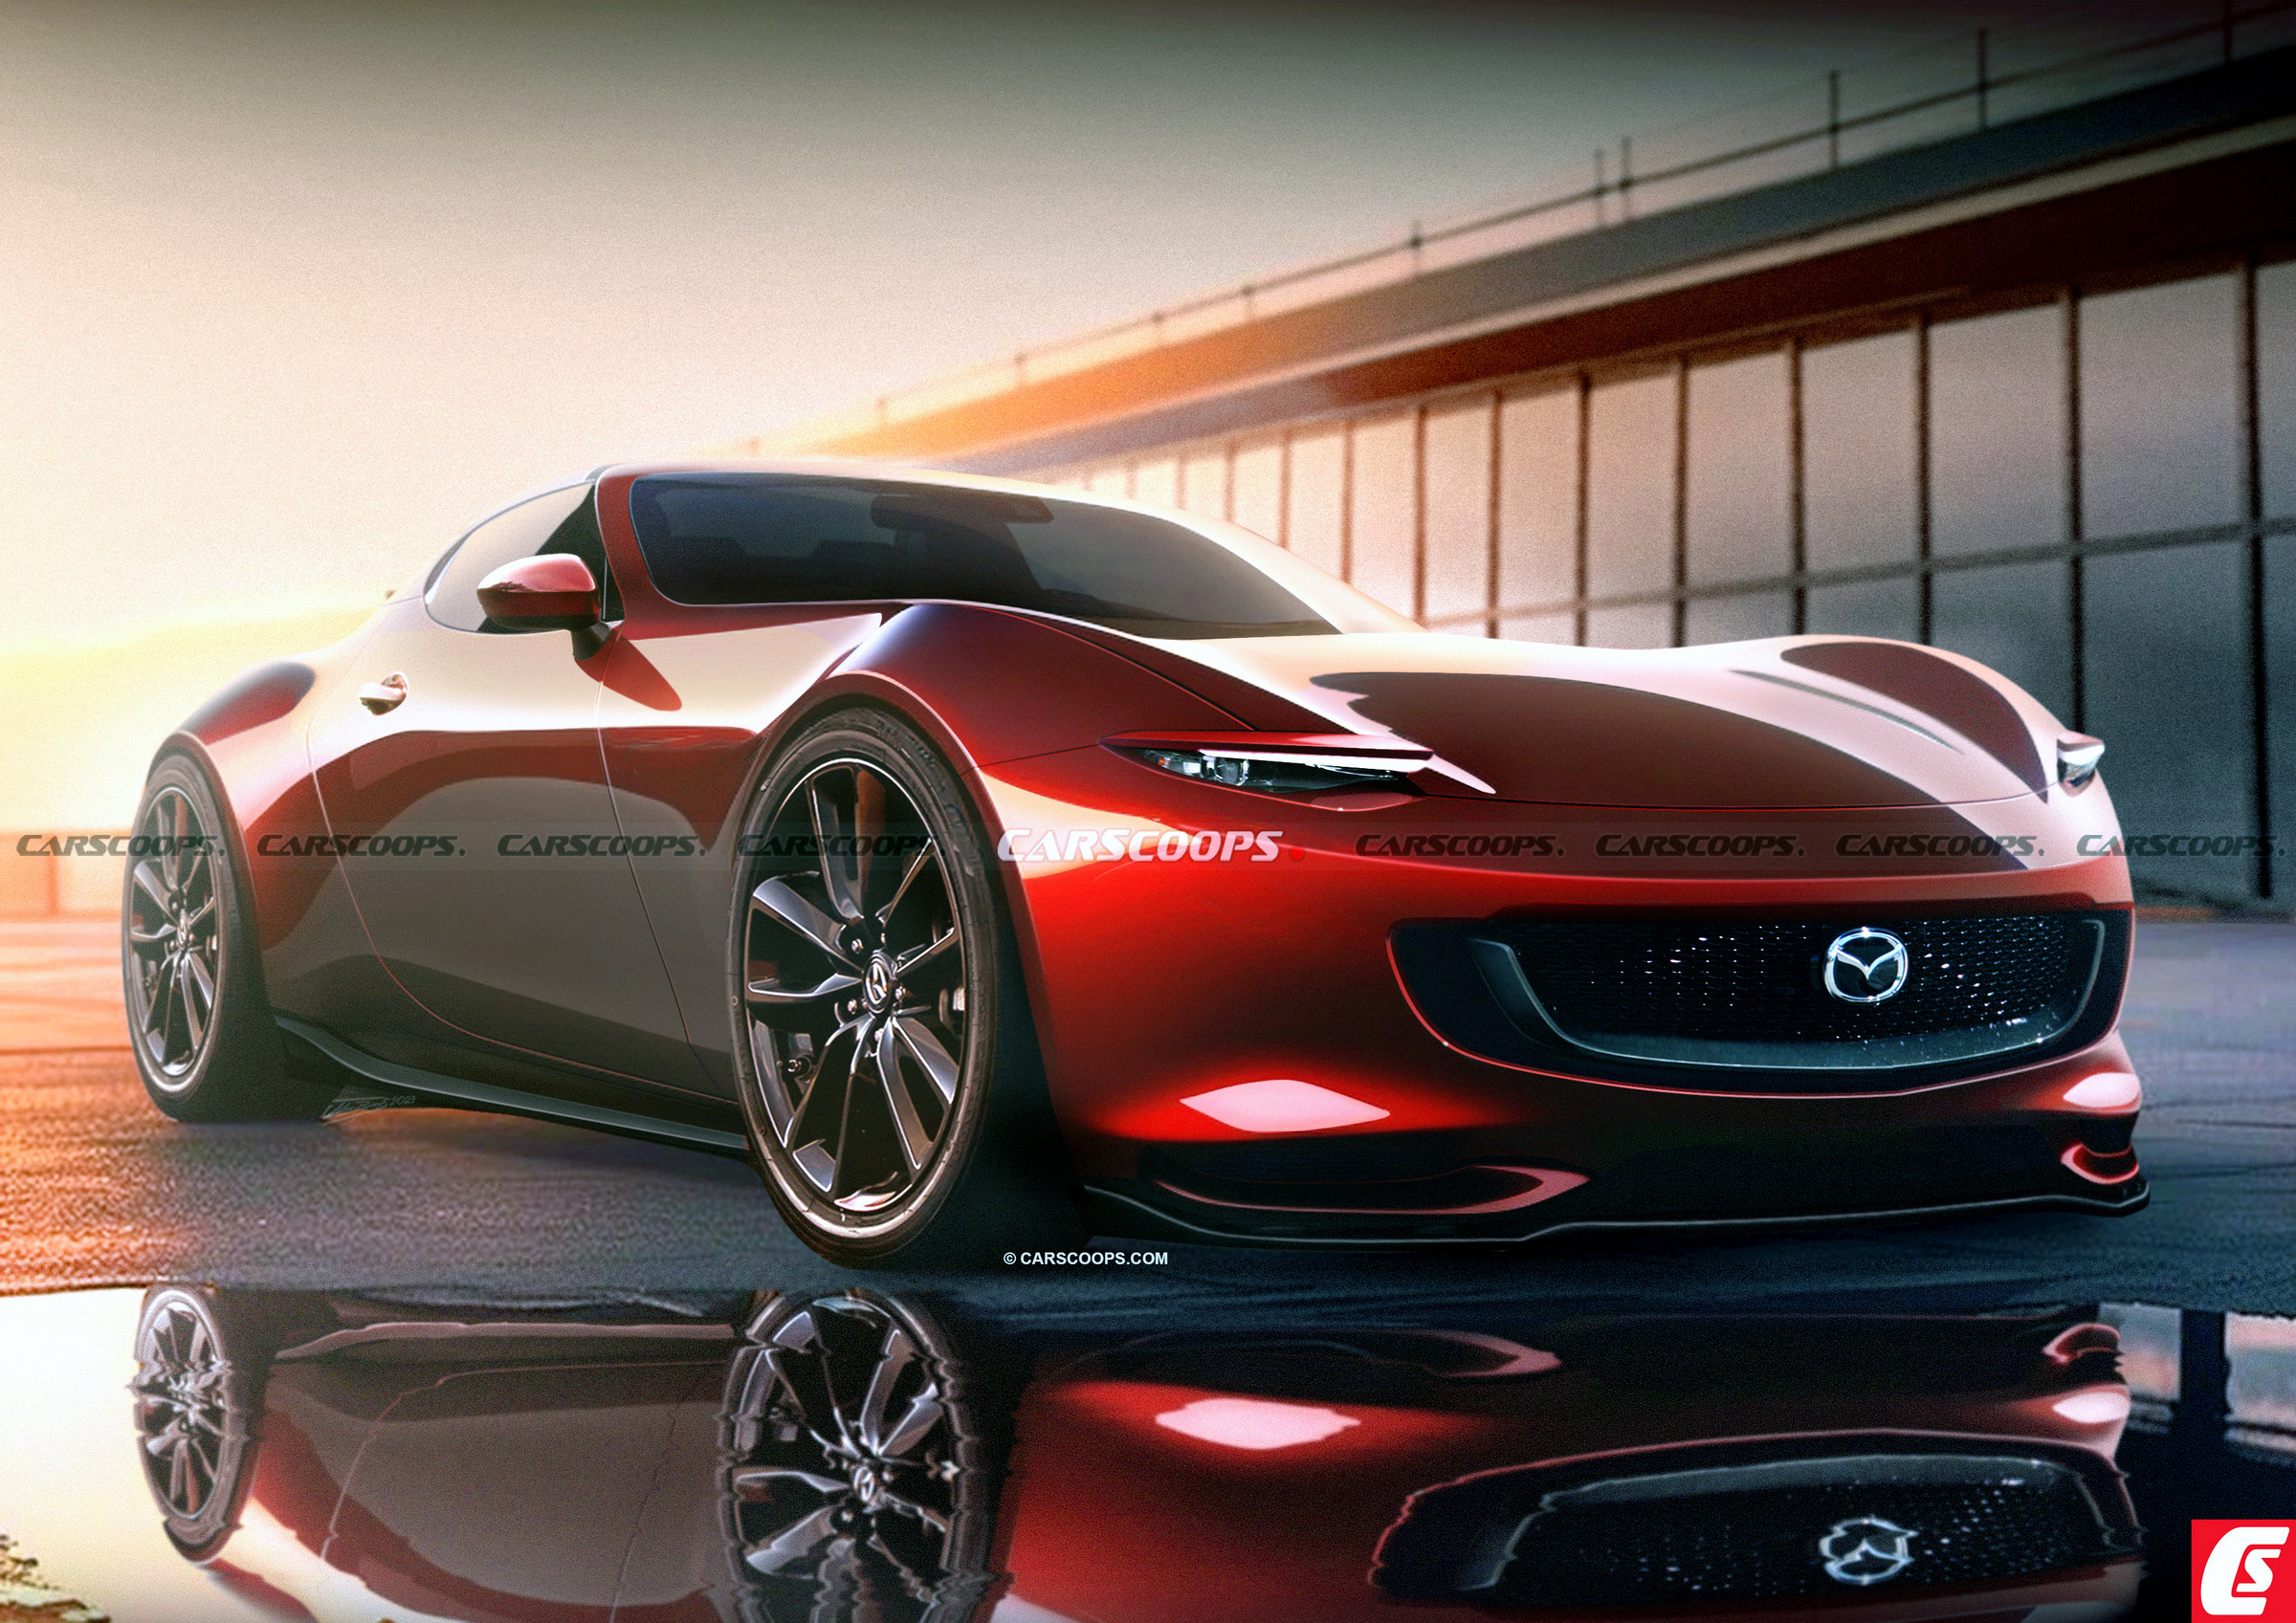 Mazda Says It's Considering An Electric MX-5 Ahead Of Concept Reveal